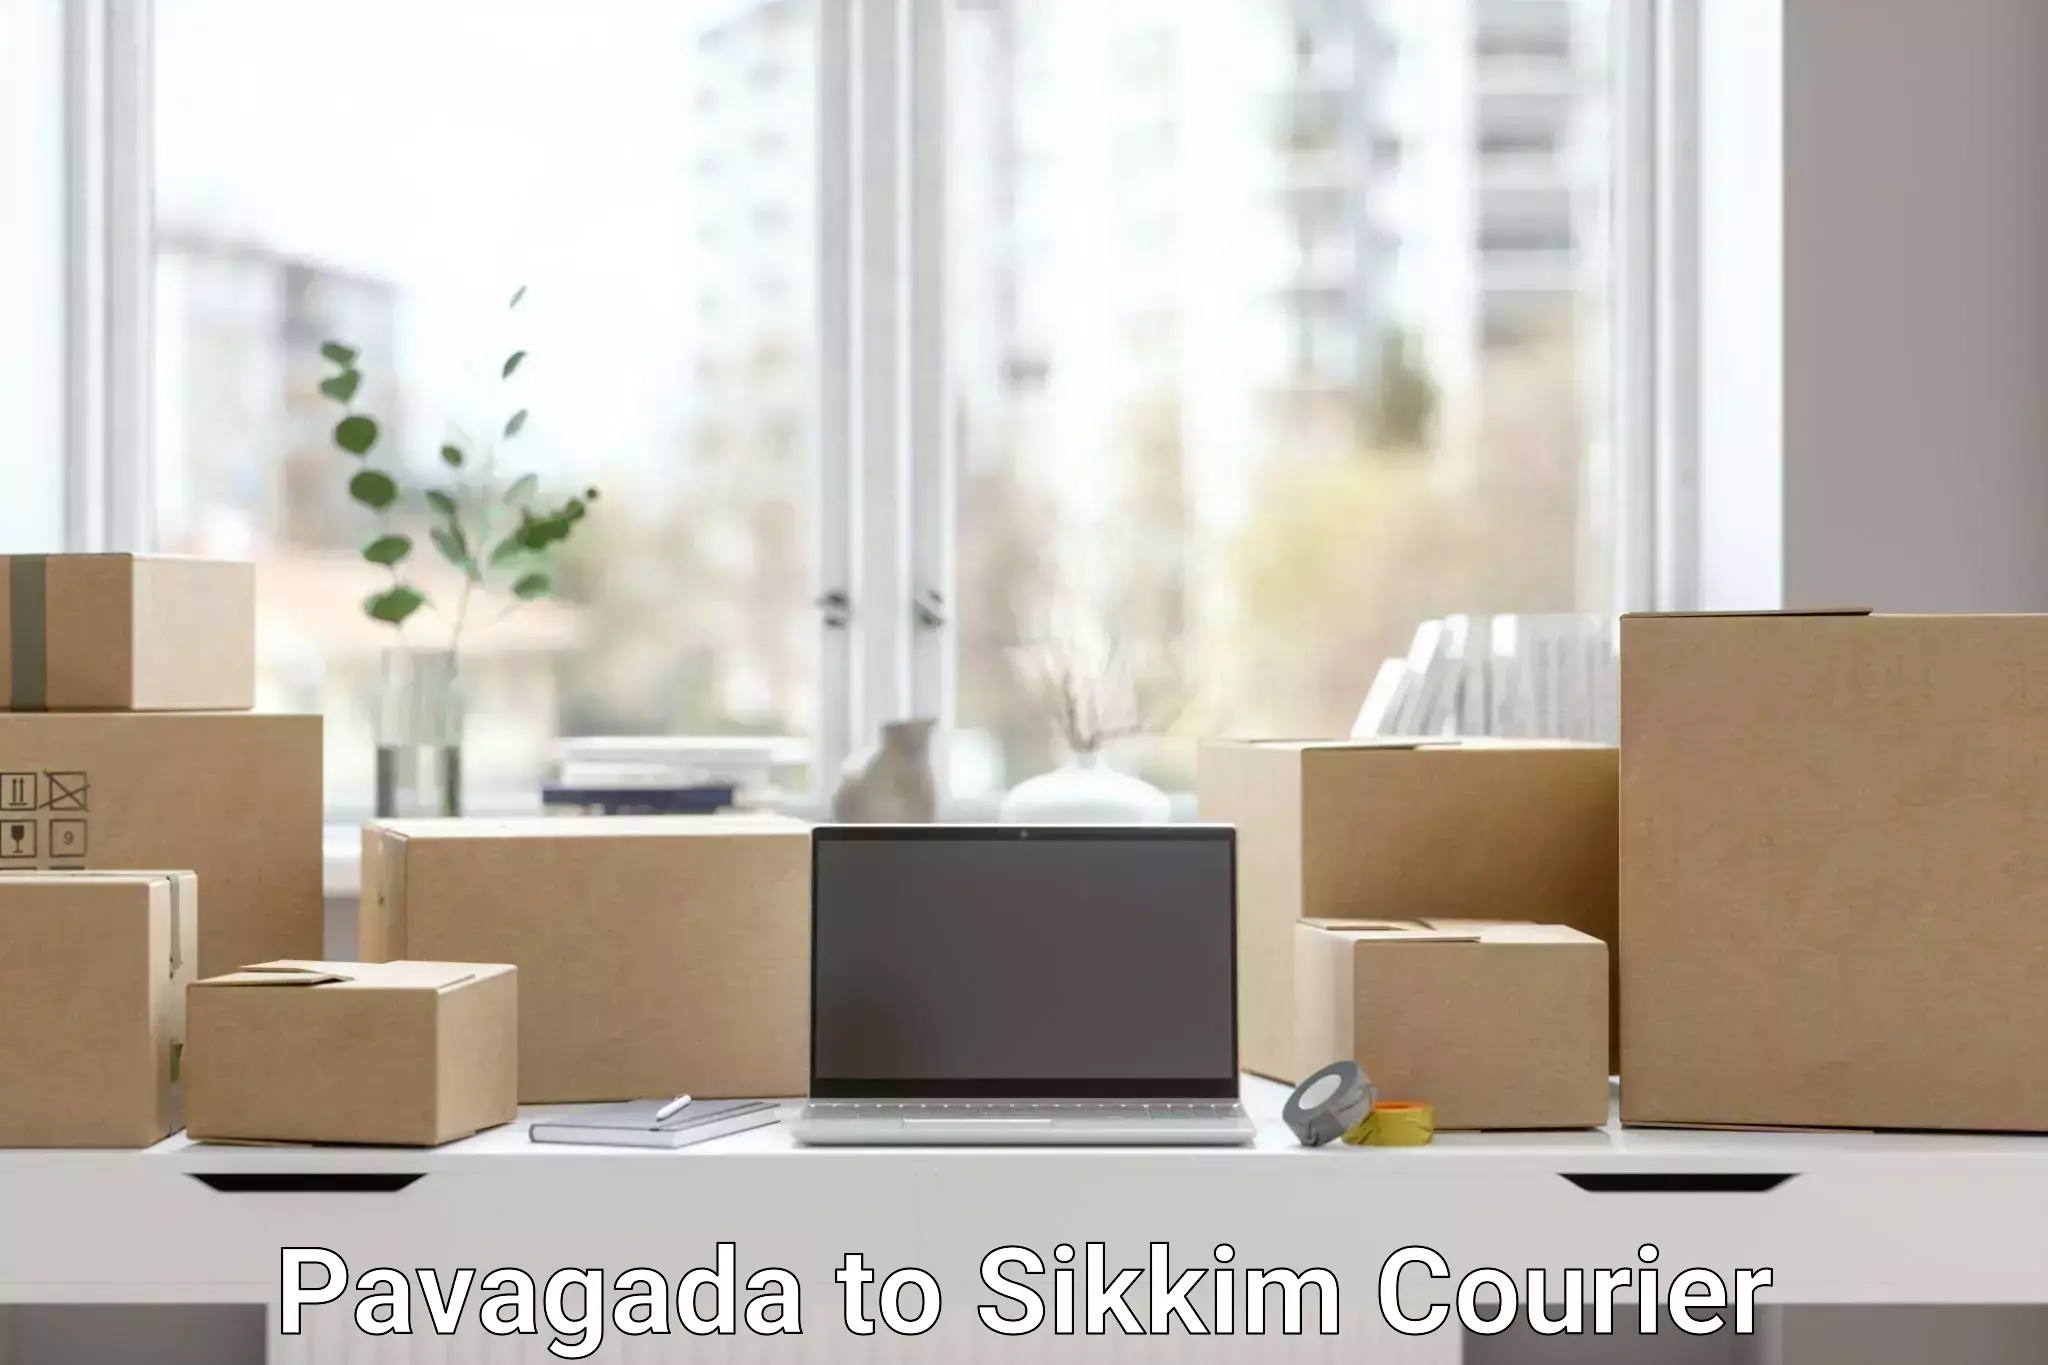 Business shipping needs Pavagada to Pelling